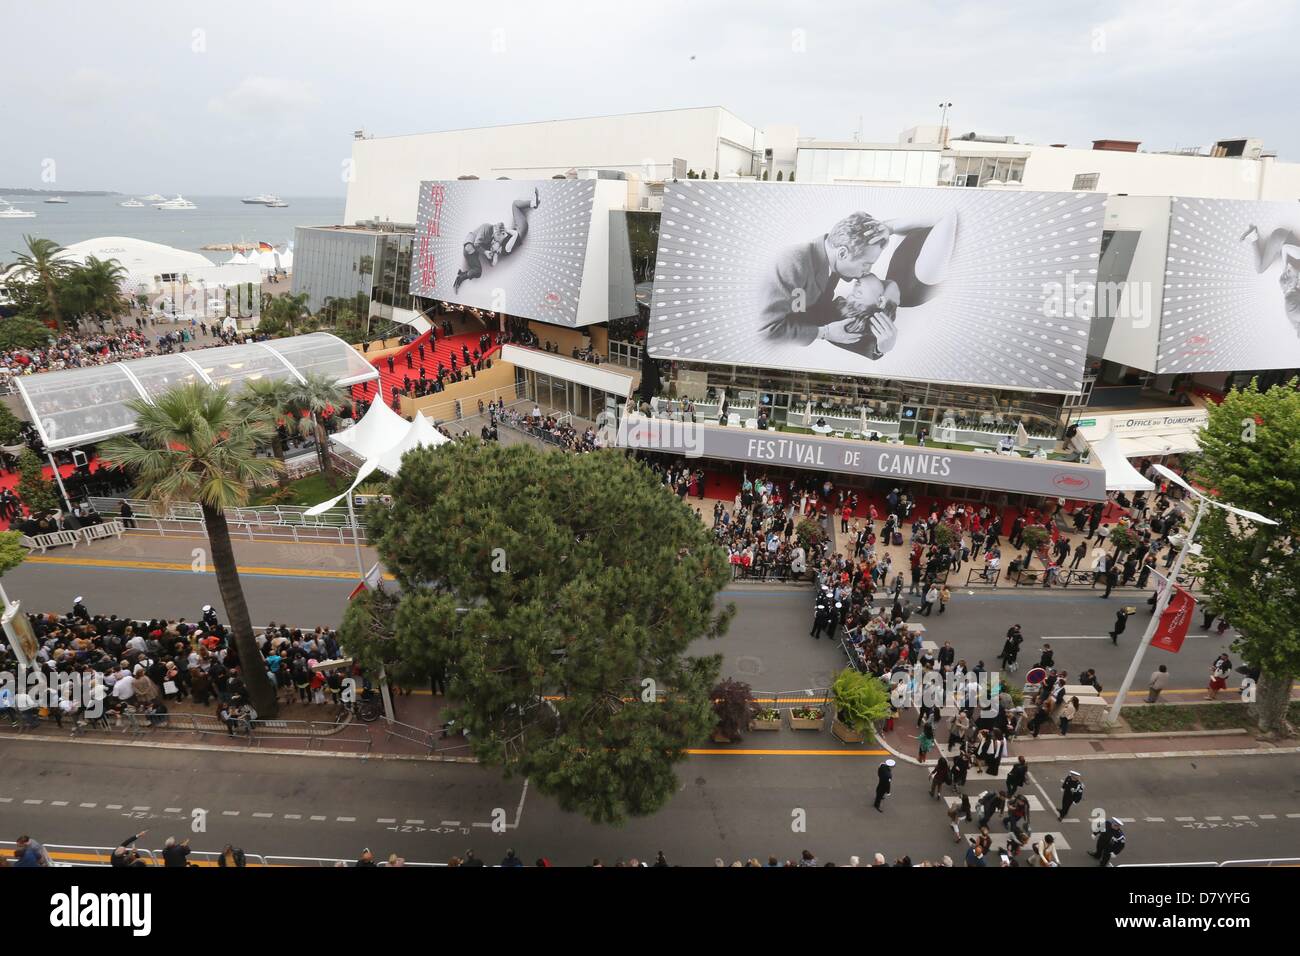 Cannes, France, 15 May 2013. Atmosphere during the premiere of "The Great Gatsby" at the 66th International Cannes Film Festival at Palais des Festivals in Cannes, France, on 15 May 2013. Photo: Hubert Boesl/DPA/Alamy Live News Stock Photo